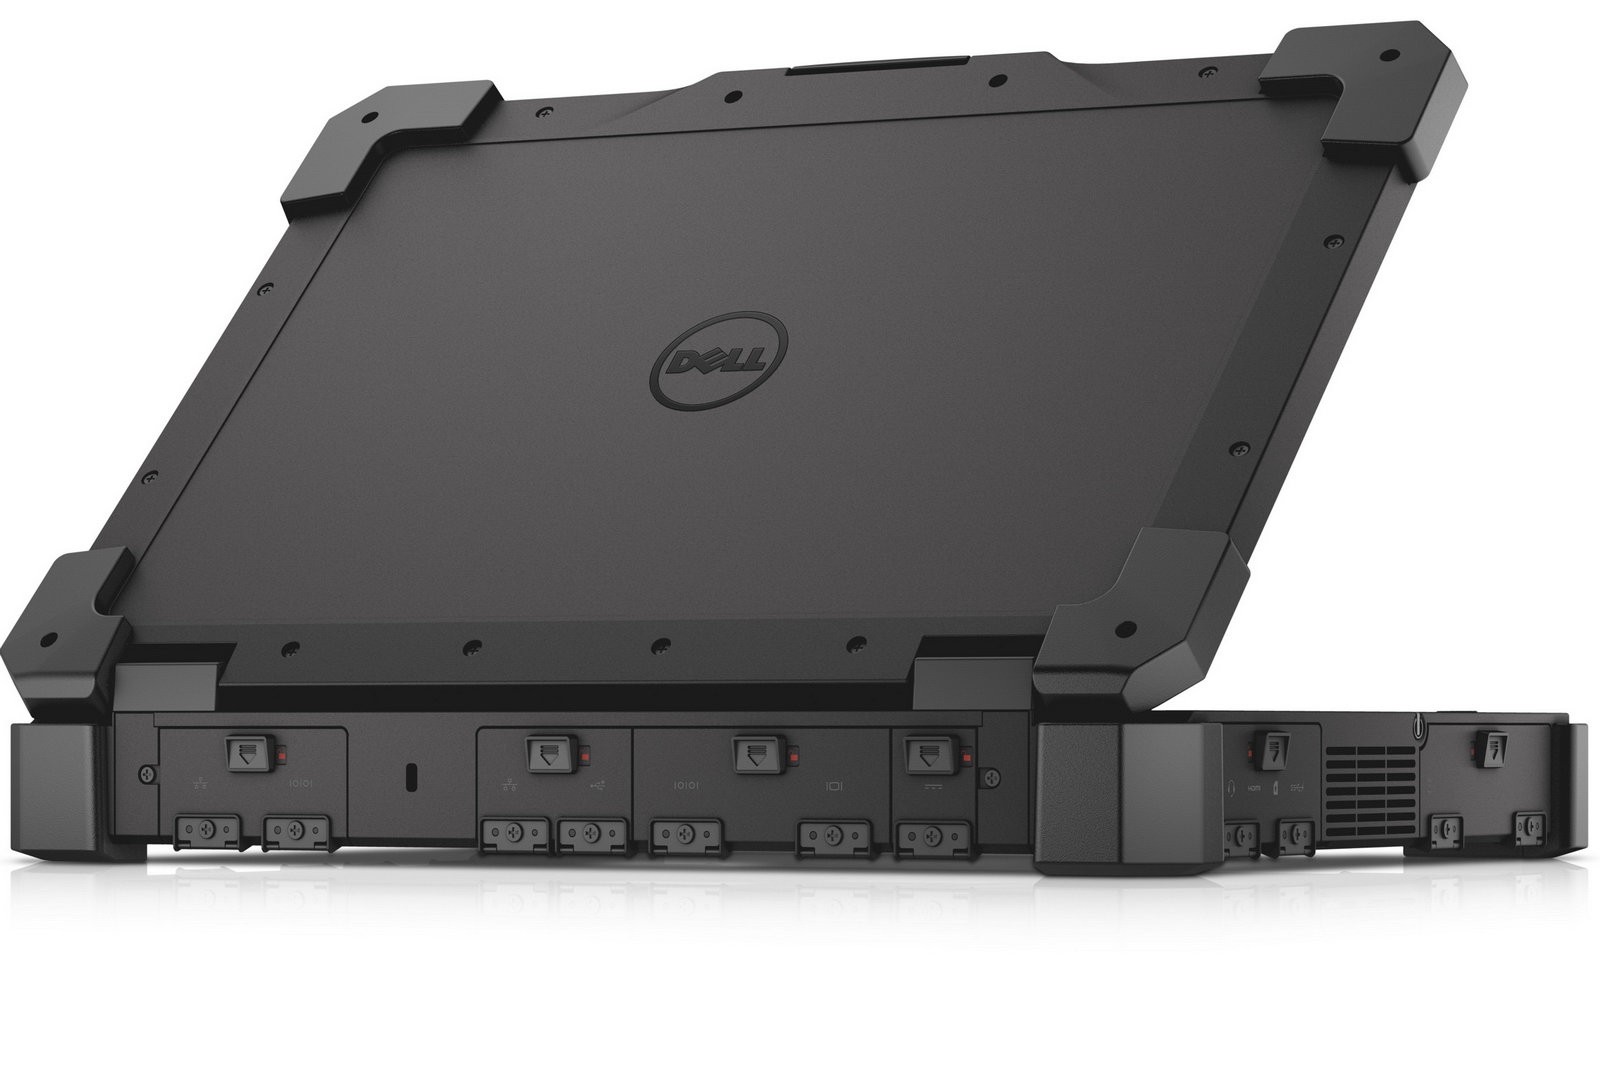 Dell Latitude 14 Rugged Extreme (Model 7404) notebook computer.
